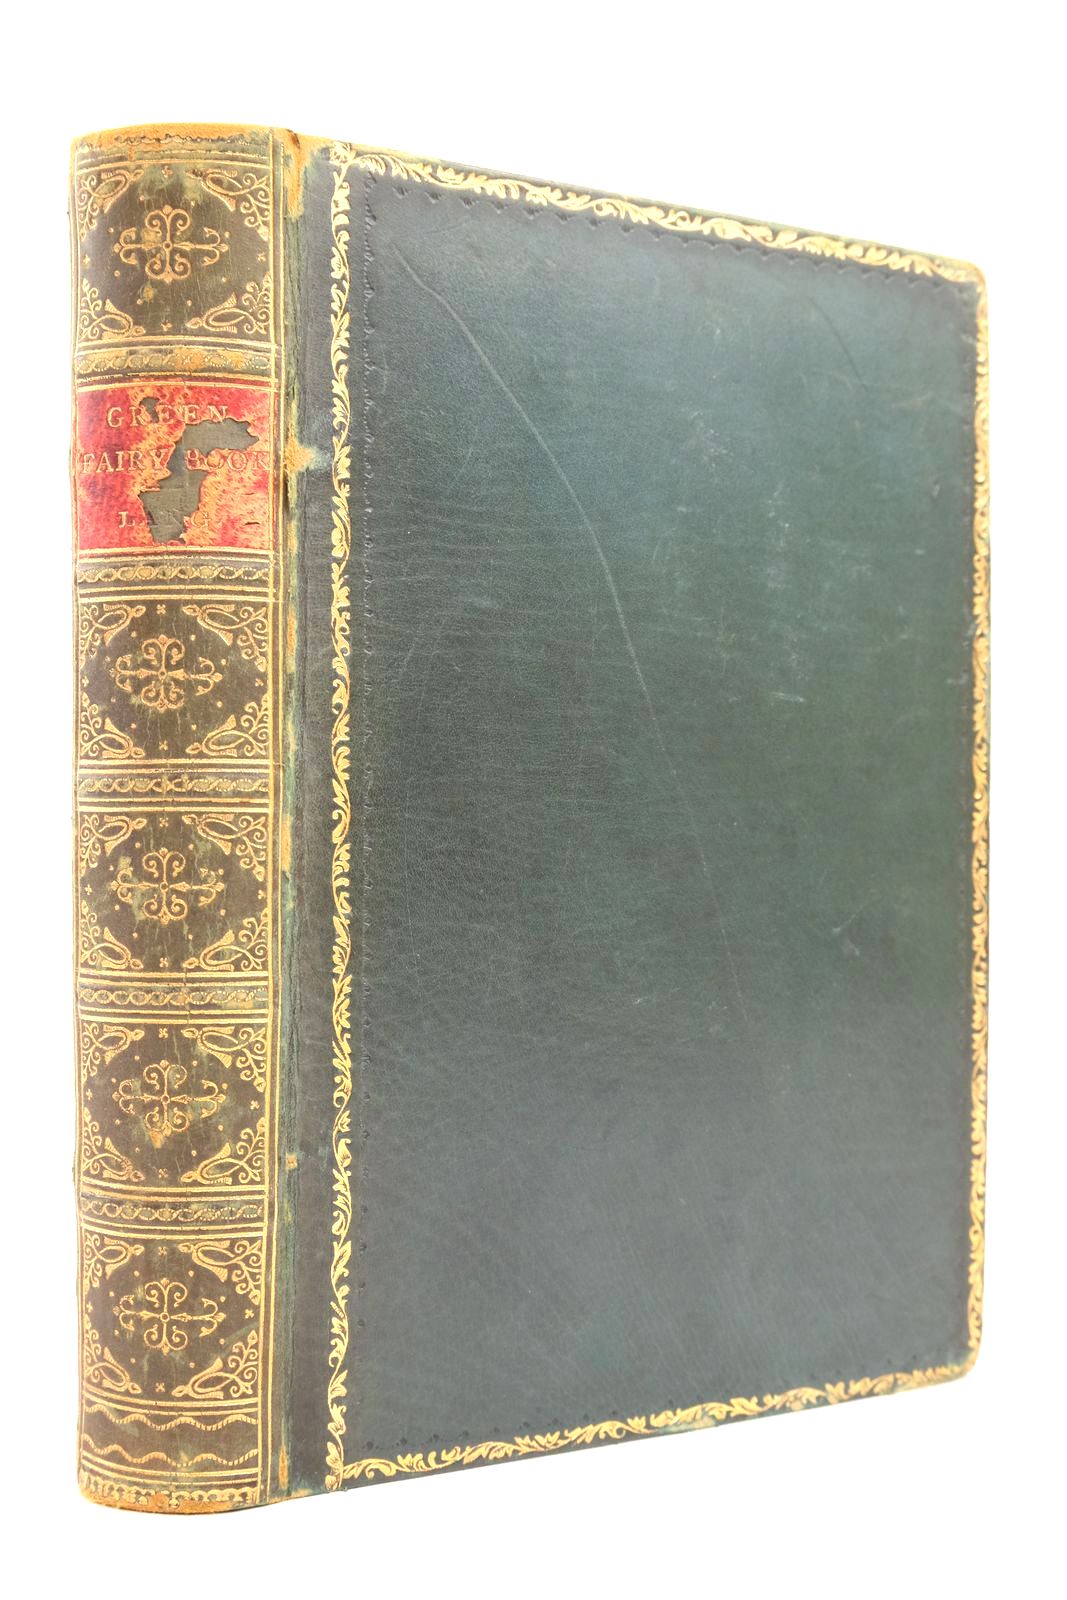 Photo of THE GREEN FAIRY BOOK- Stock Number: 2139414